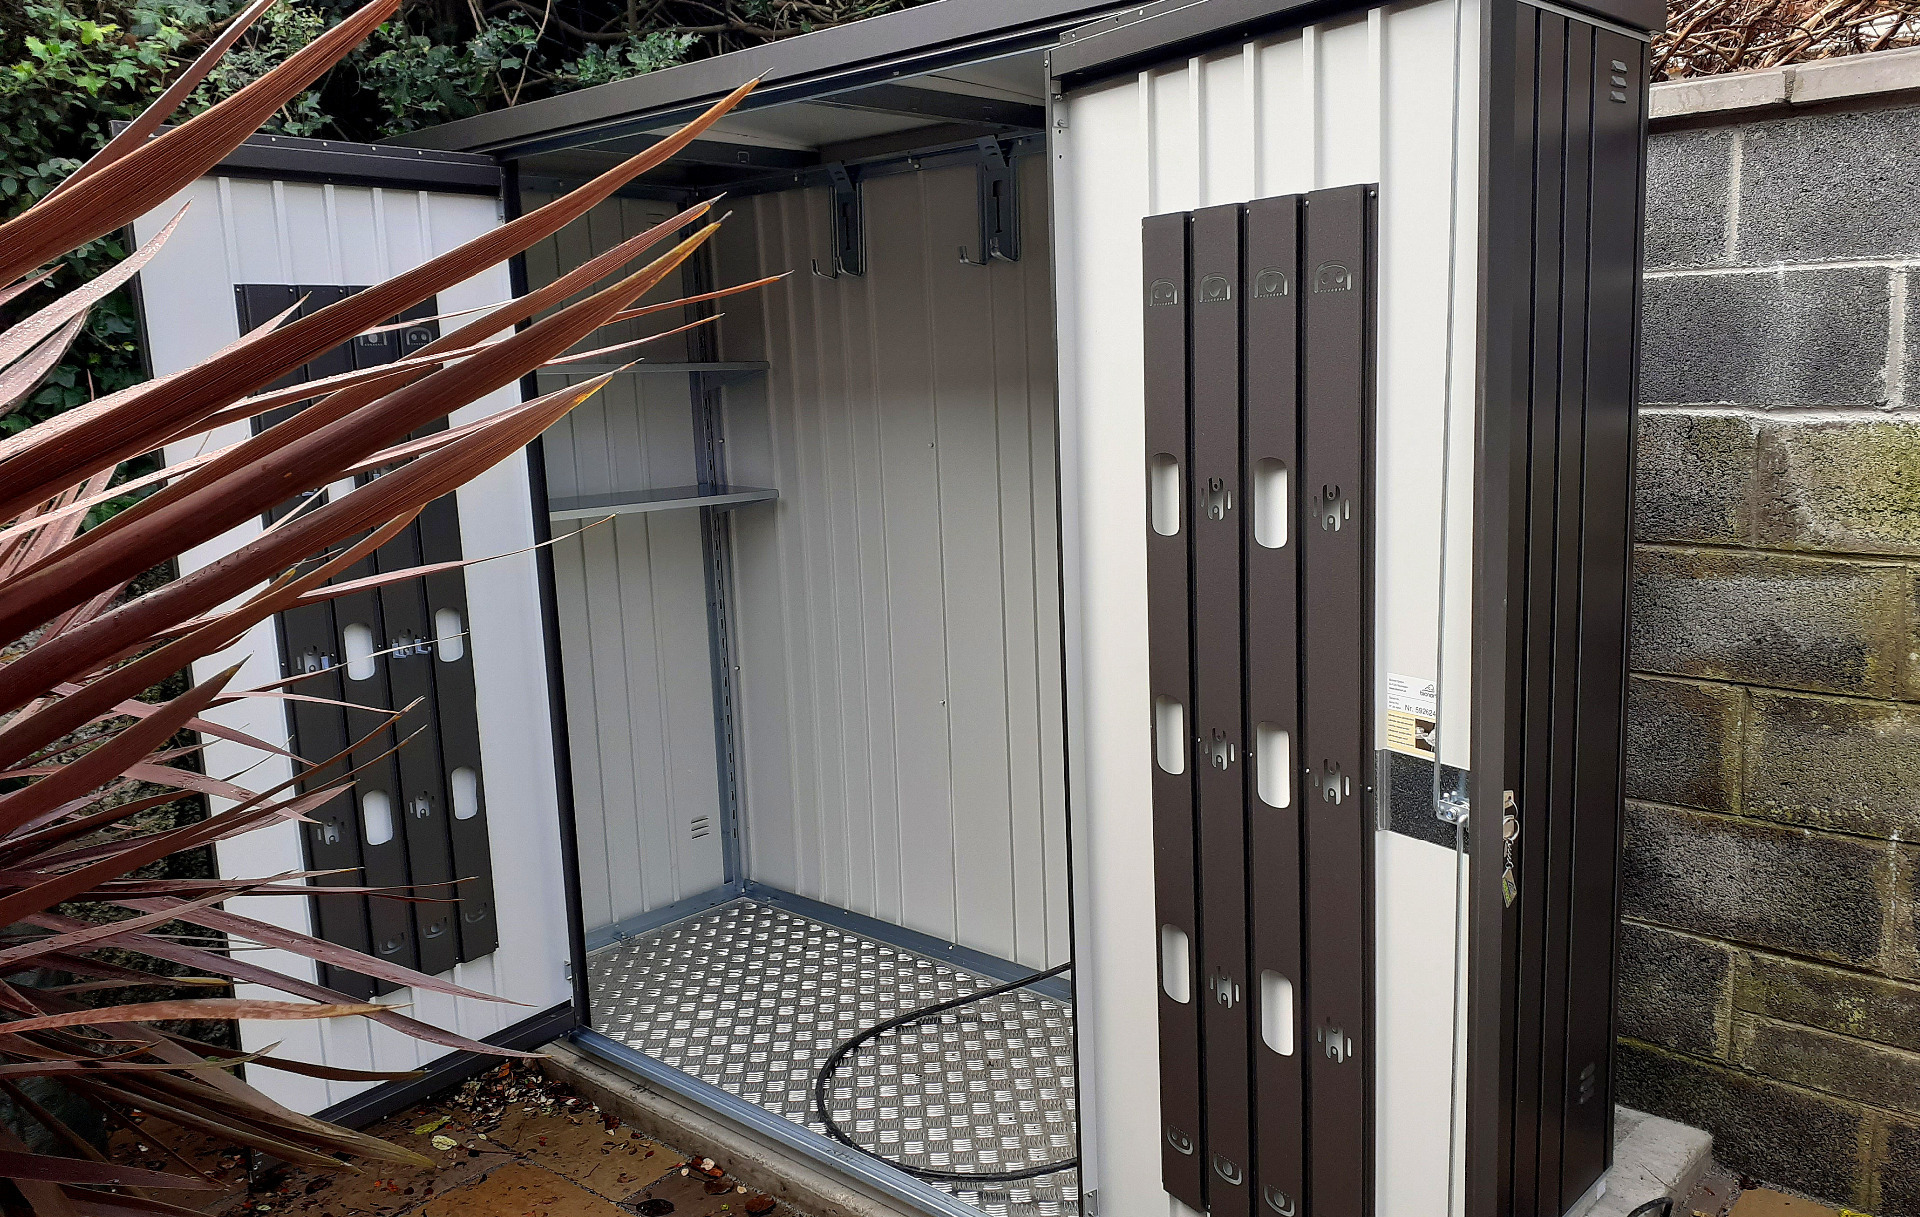 The superb quality and style of the Biohort Equipment Locker 230 in metallic dark grey  with optional accessories including aluminium floor frame, aluminium floor panels | supplied + installed in Ranelagh by Owen Chubb Landscapers. Tel 087-2306 128.